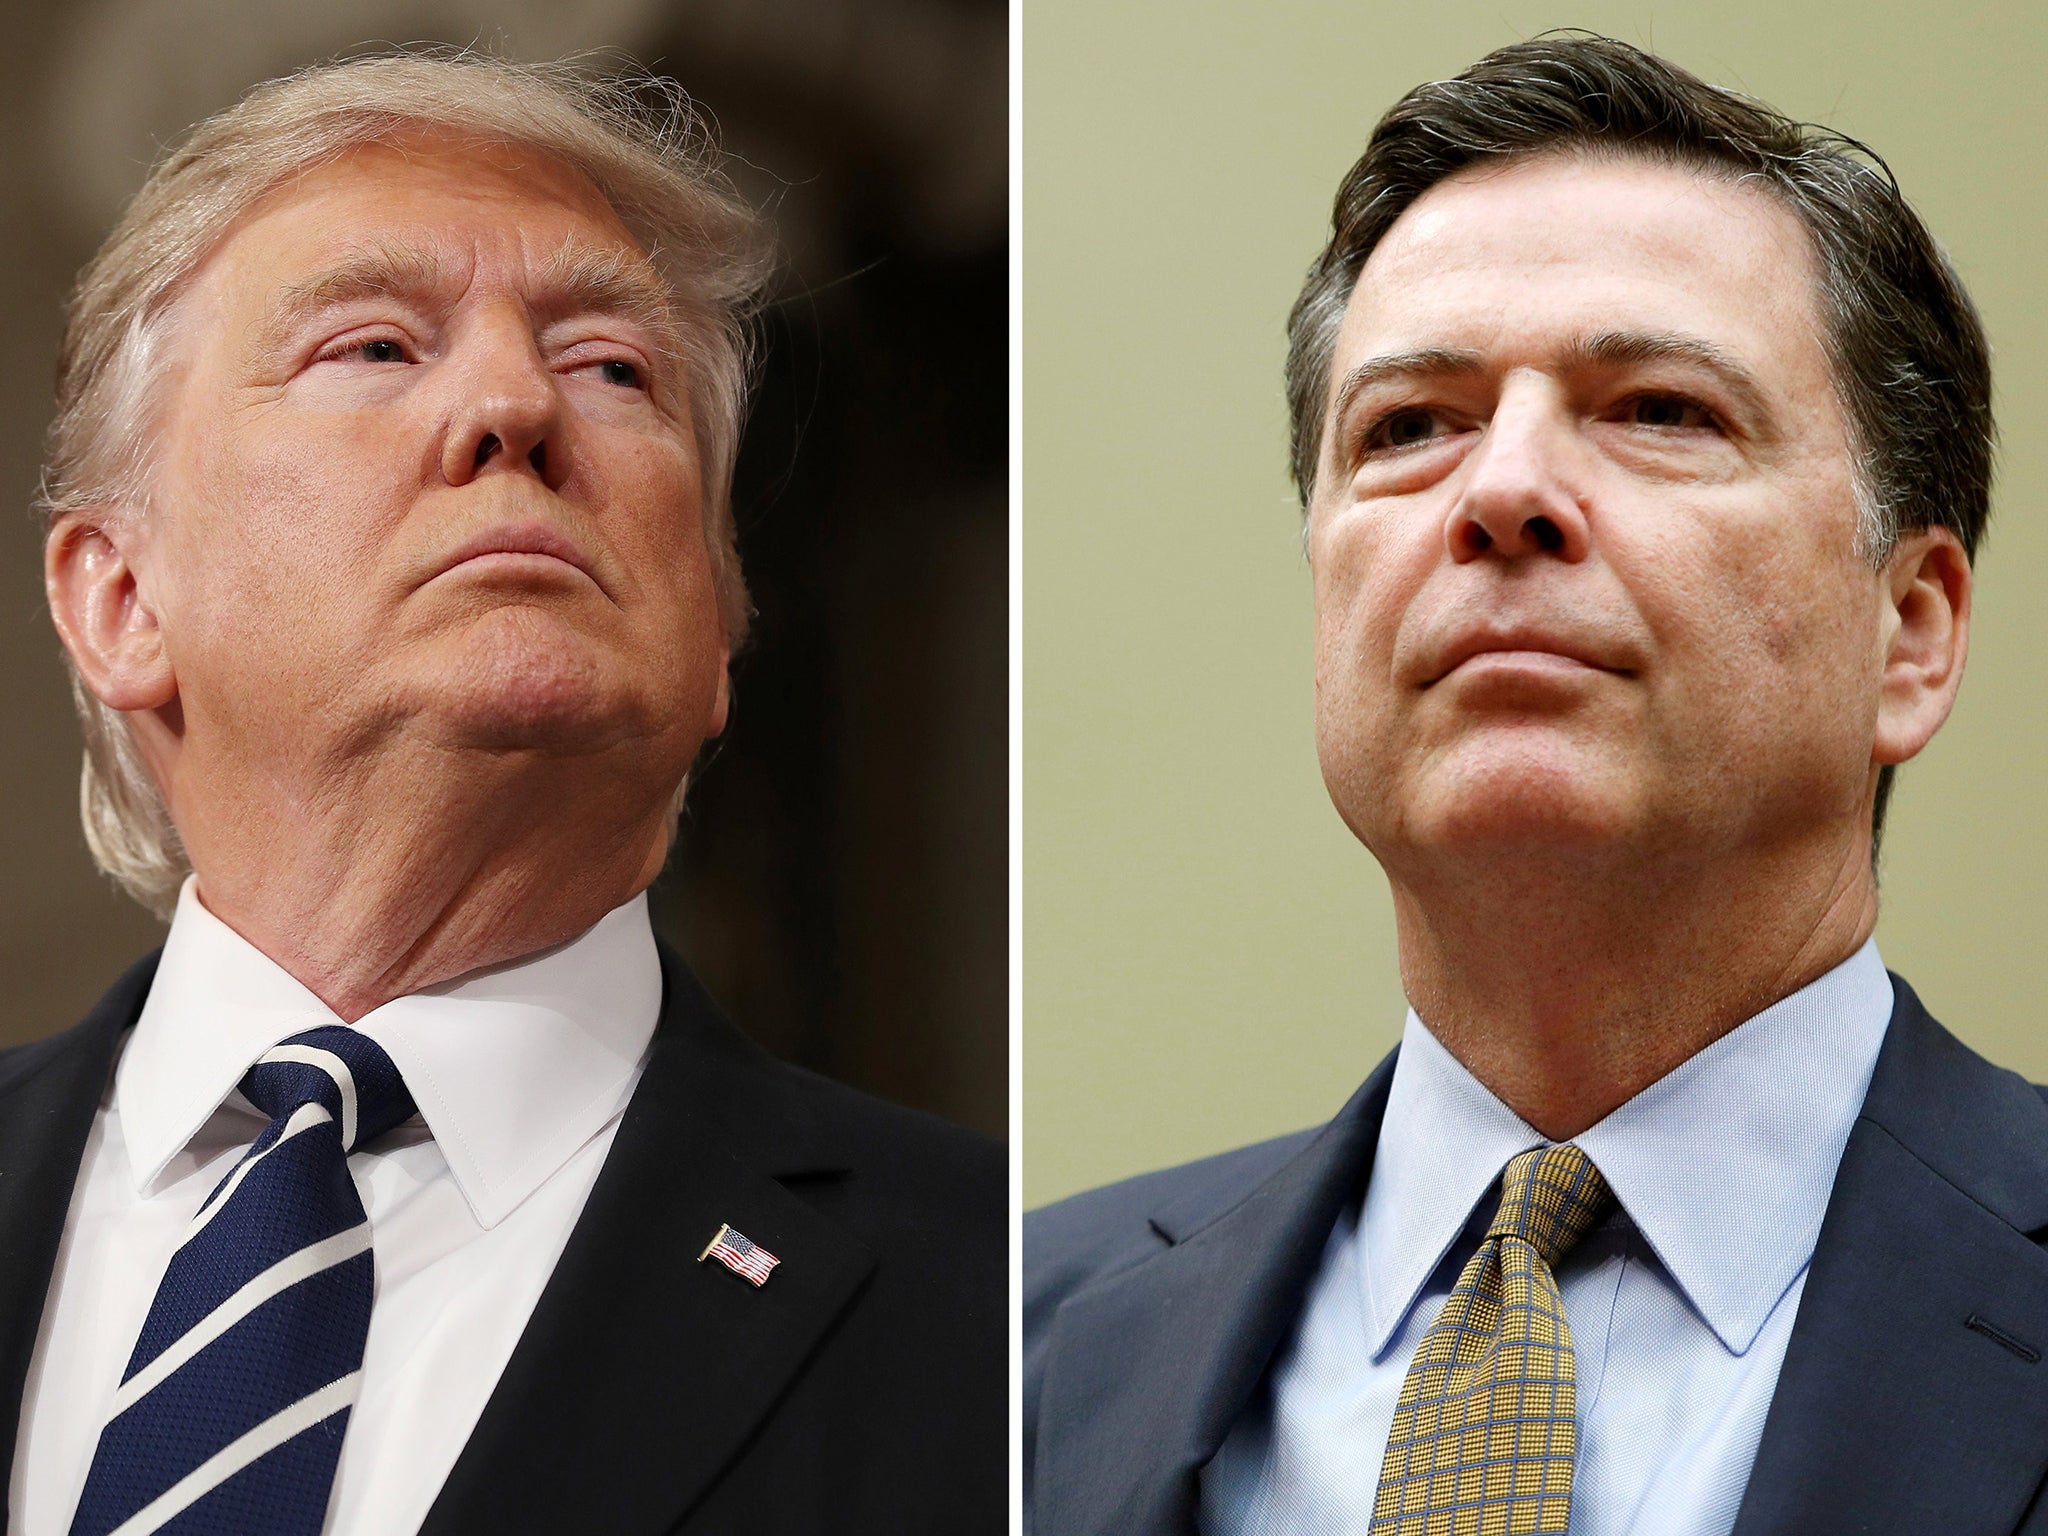 President Trump fired James Comey, FBI director over his conduct over the Clinton emails